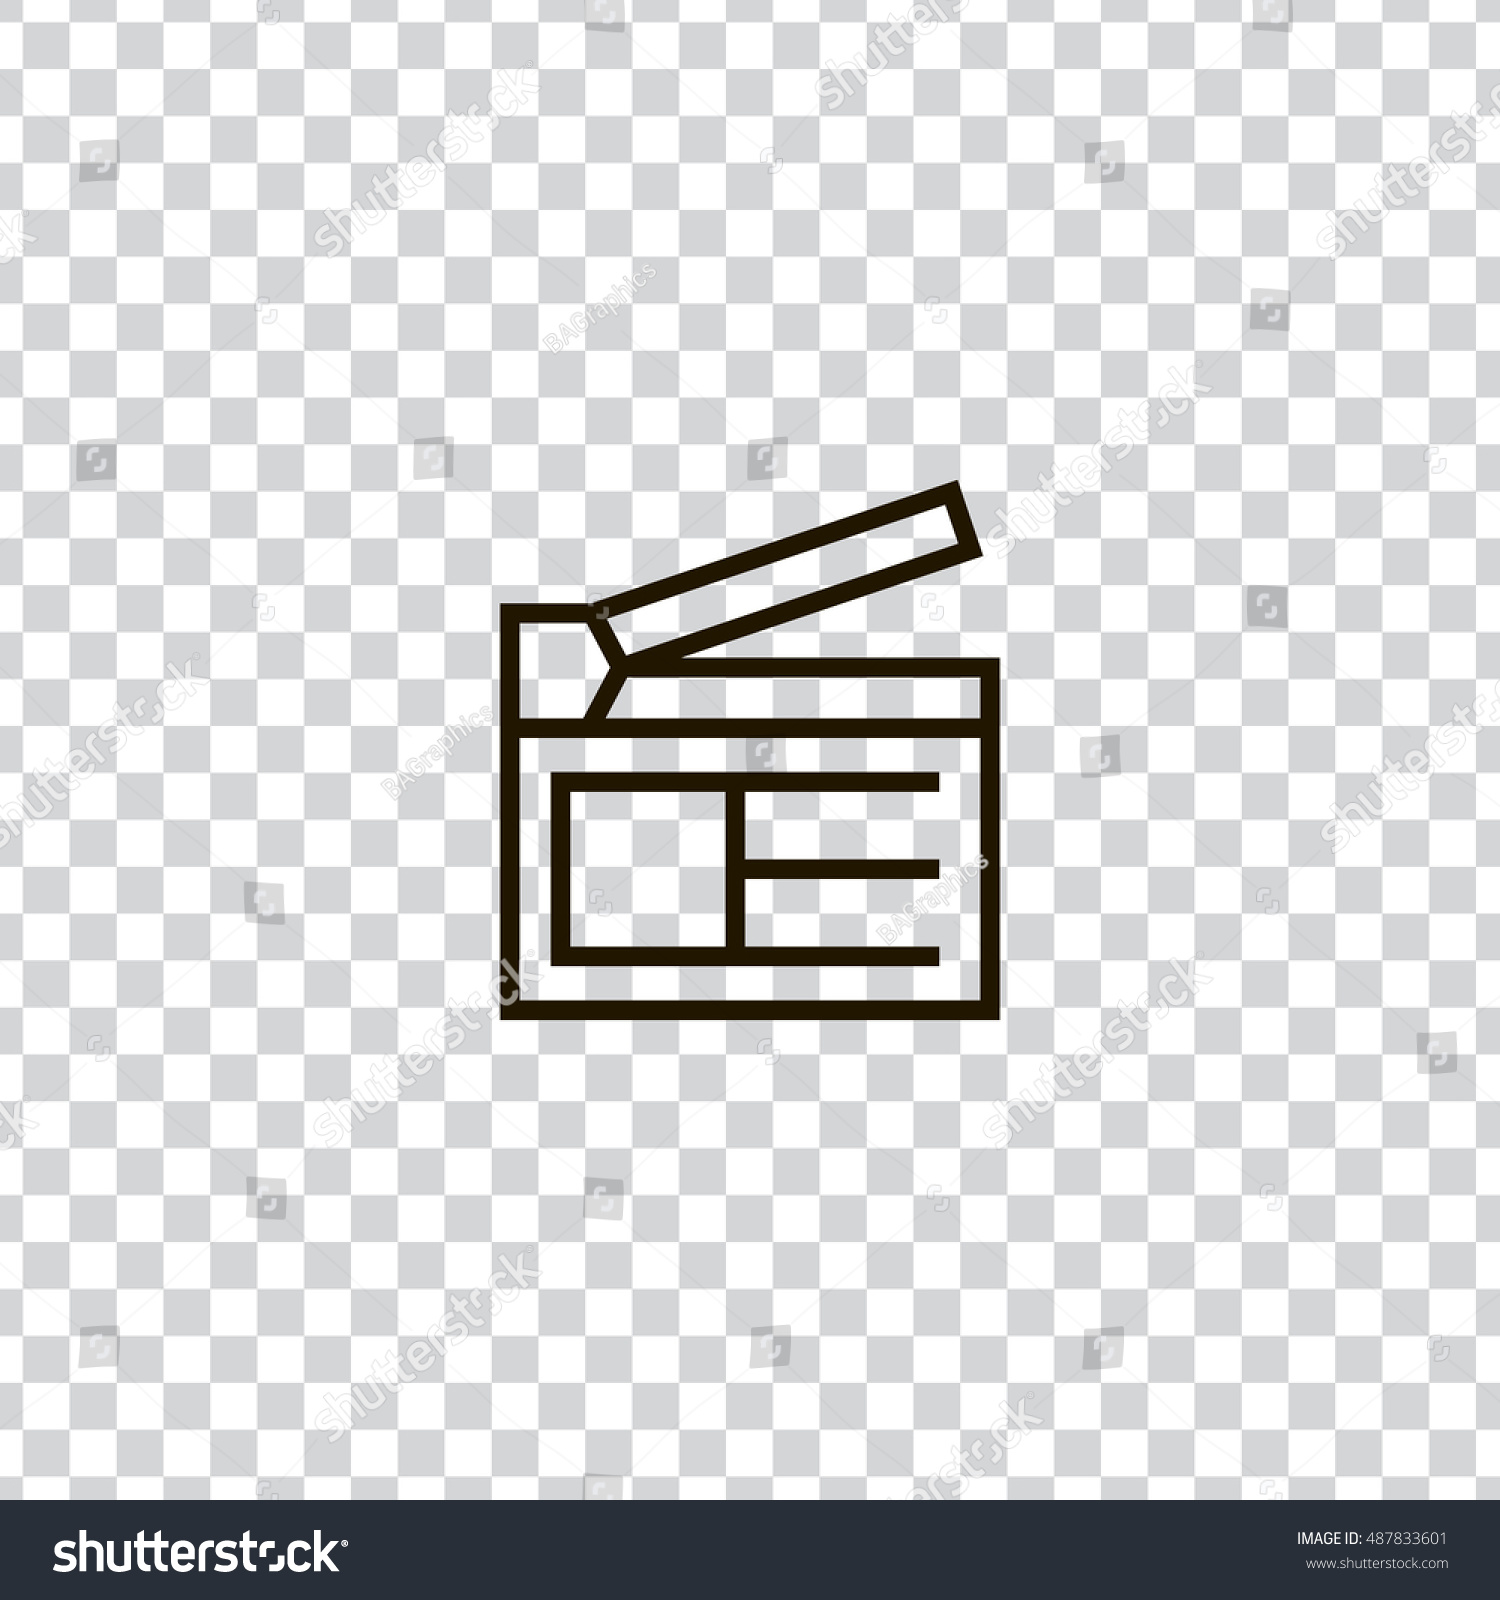 SVG of Clapperboard icon vector, clip art. Also useful as logo, web UI element, symbol, graphic image, transparent silhouette and illustration. Compatible with ai, cdr, jpg, png, svg, pdf, ico and eps. svg